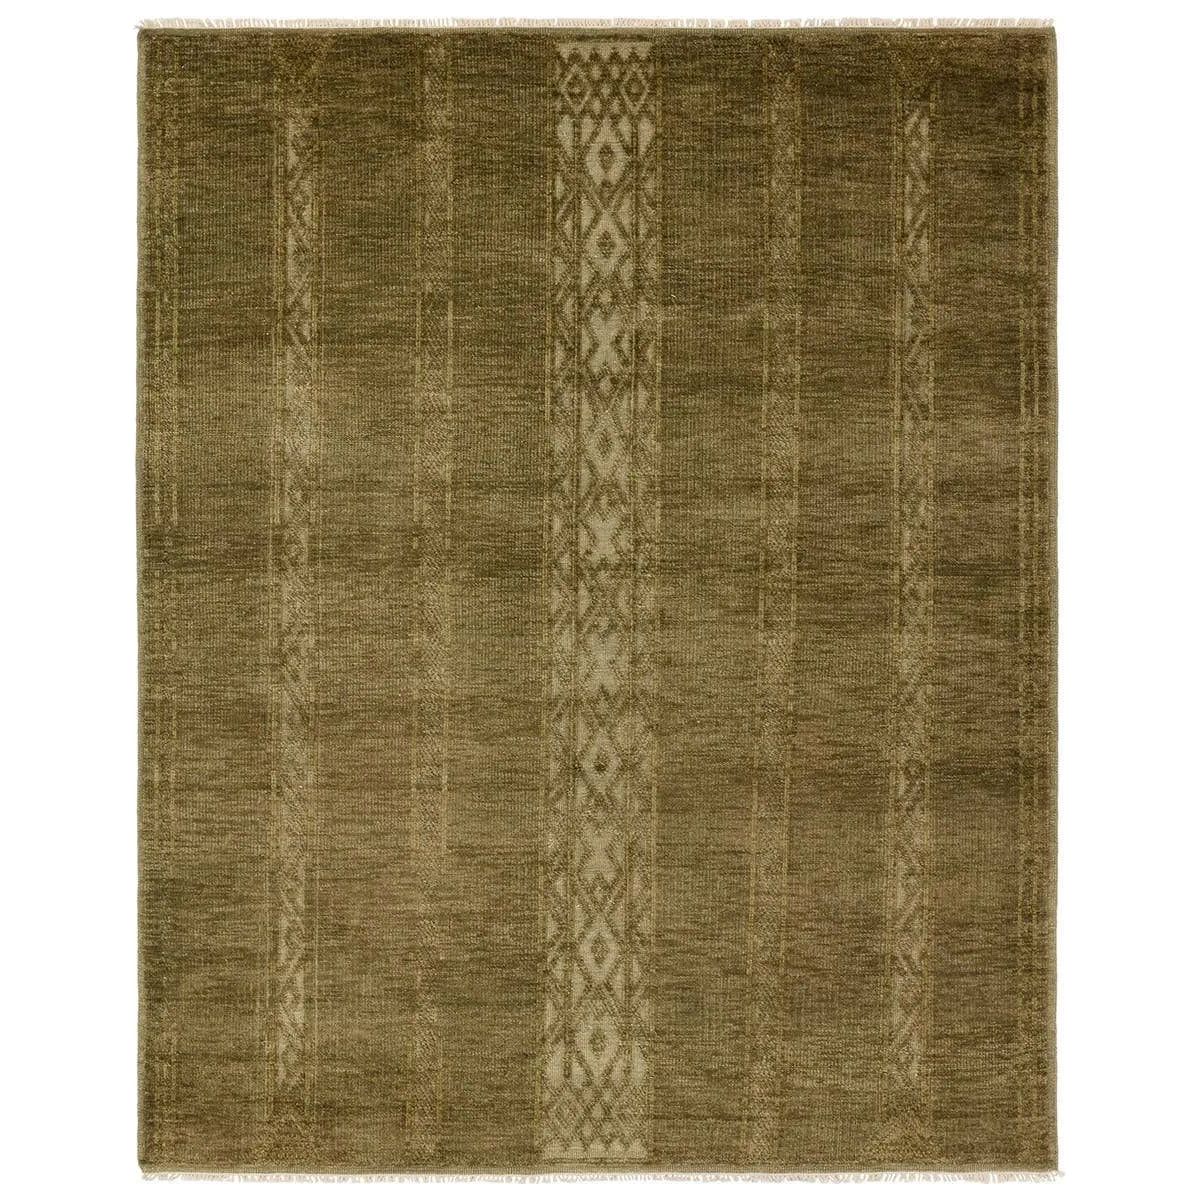 The hand-knotted Tapeten Achala features globally inspired designs that evoke a balance of tradition and modernity. The Achala pattern stuns with a high-low effect that distinguishes the olive green, geometric, striped pattern. Amethyst Home provides interior design, new home construction design consulting, vintage area rugs, and lighting in the Alpharetta metro area.